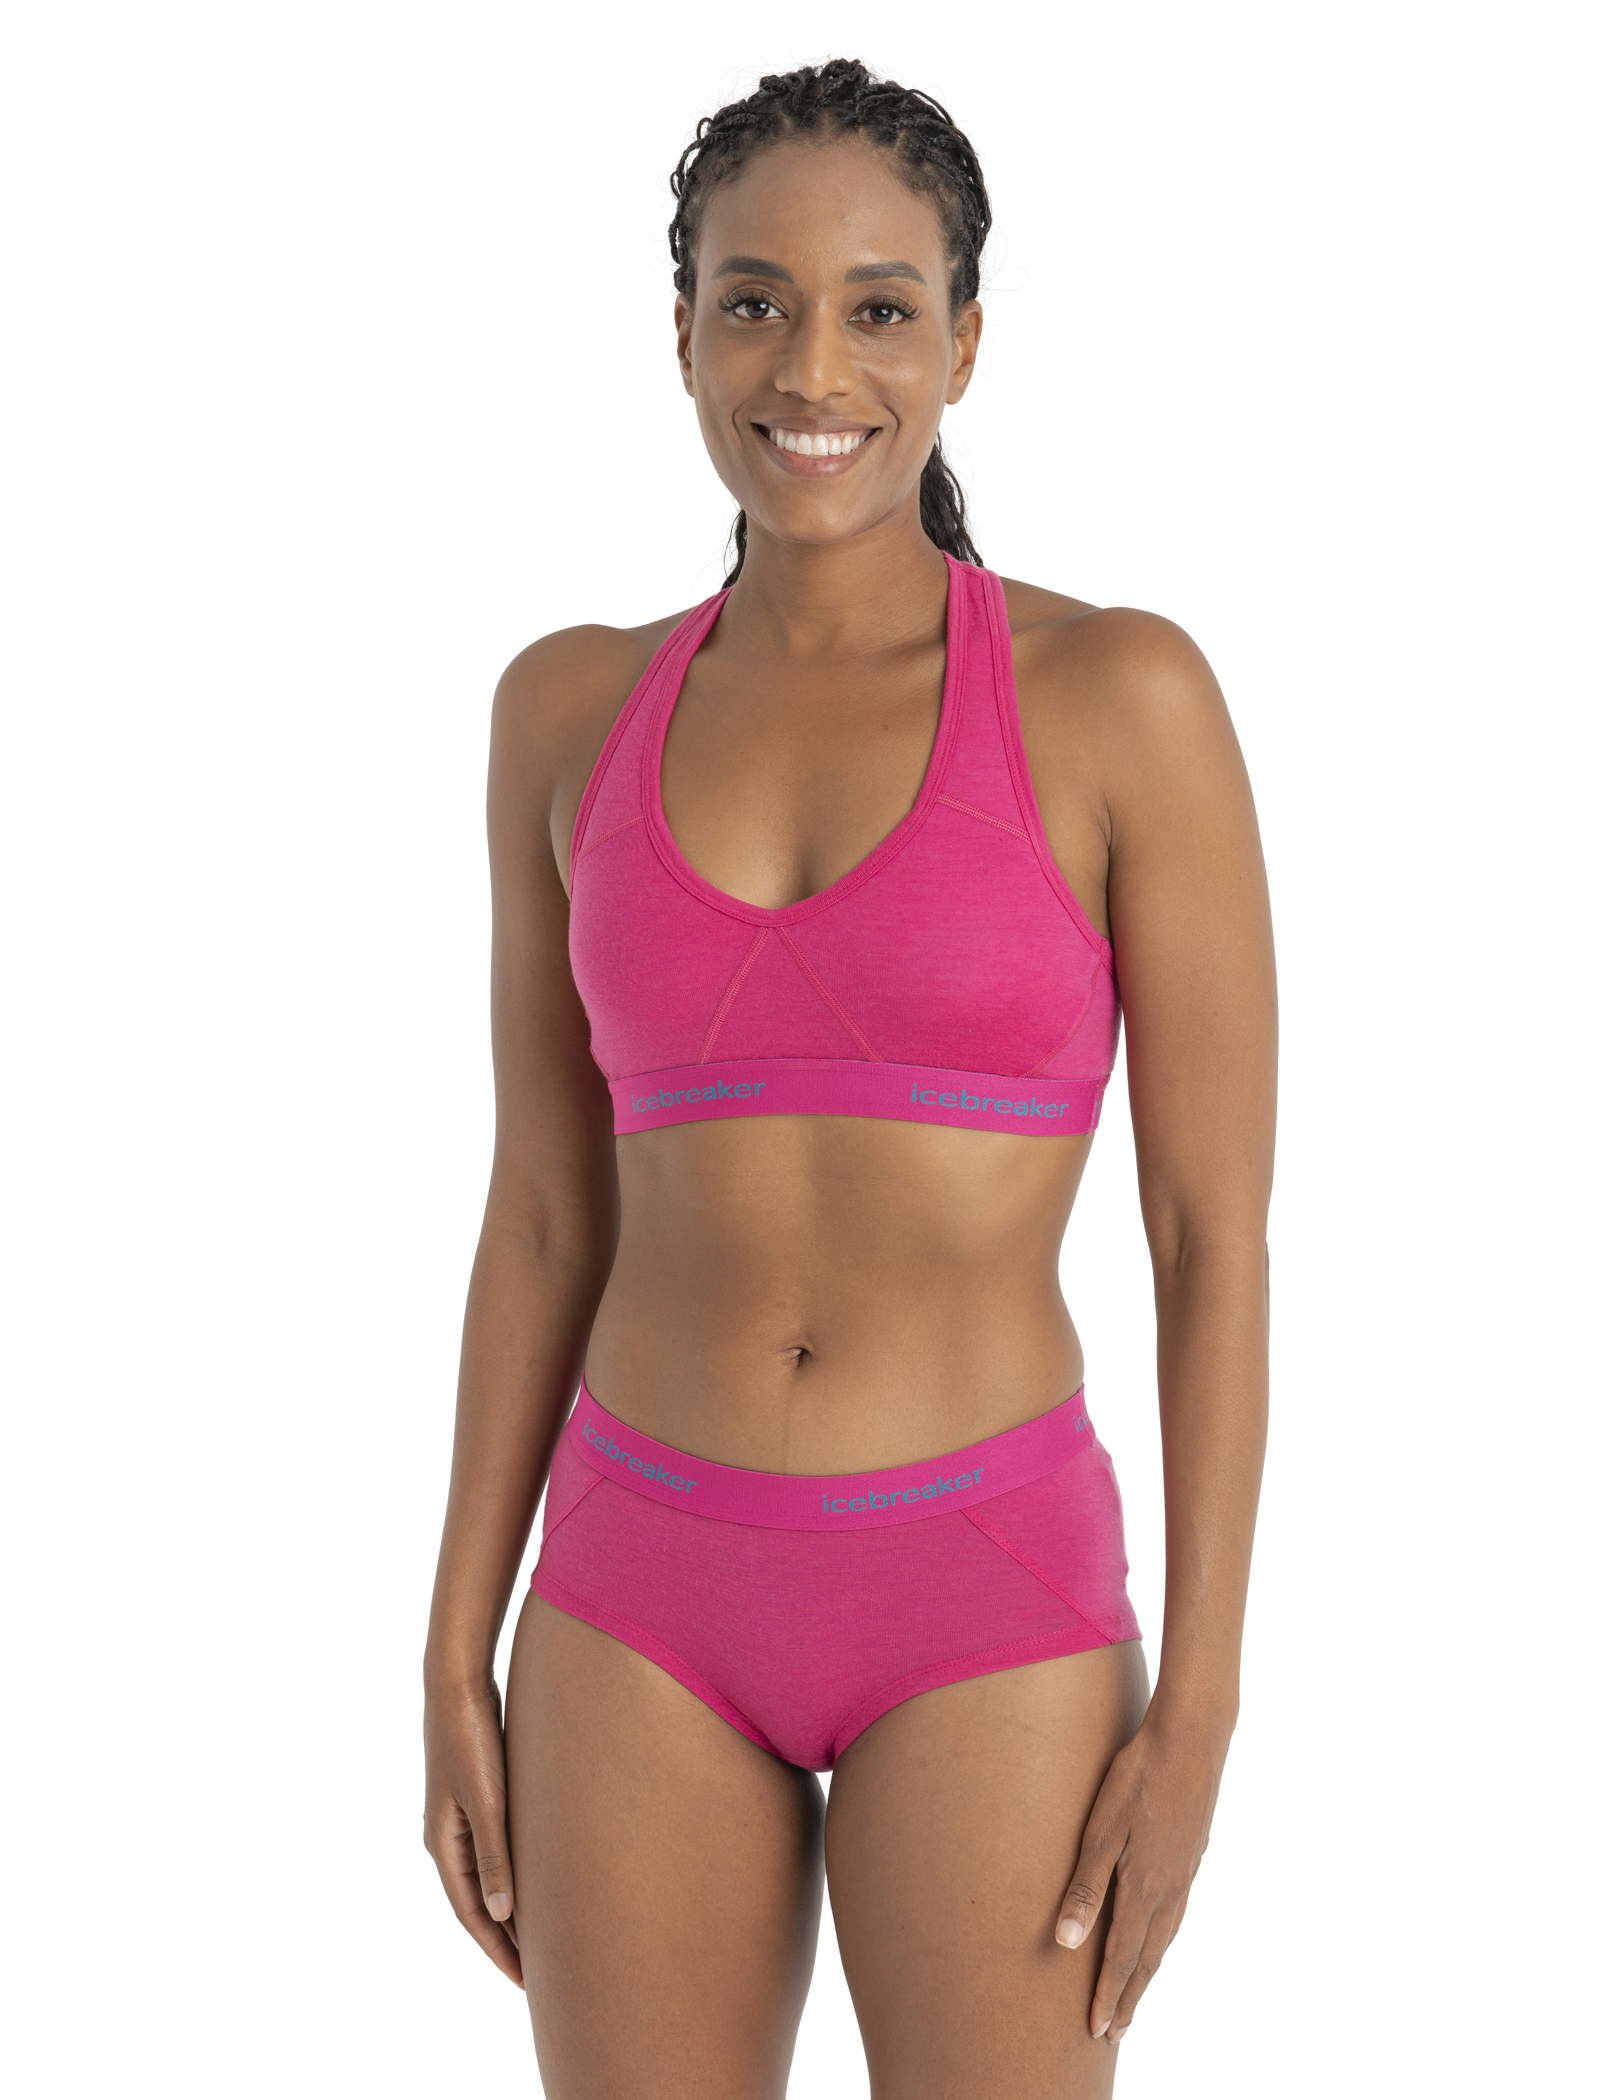 Lot of 3 American Apparel Knockout Pink Forward Racerback Sports